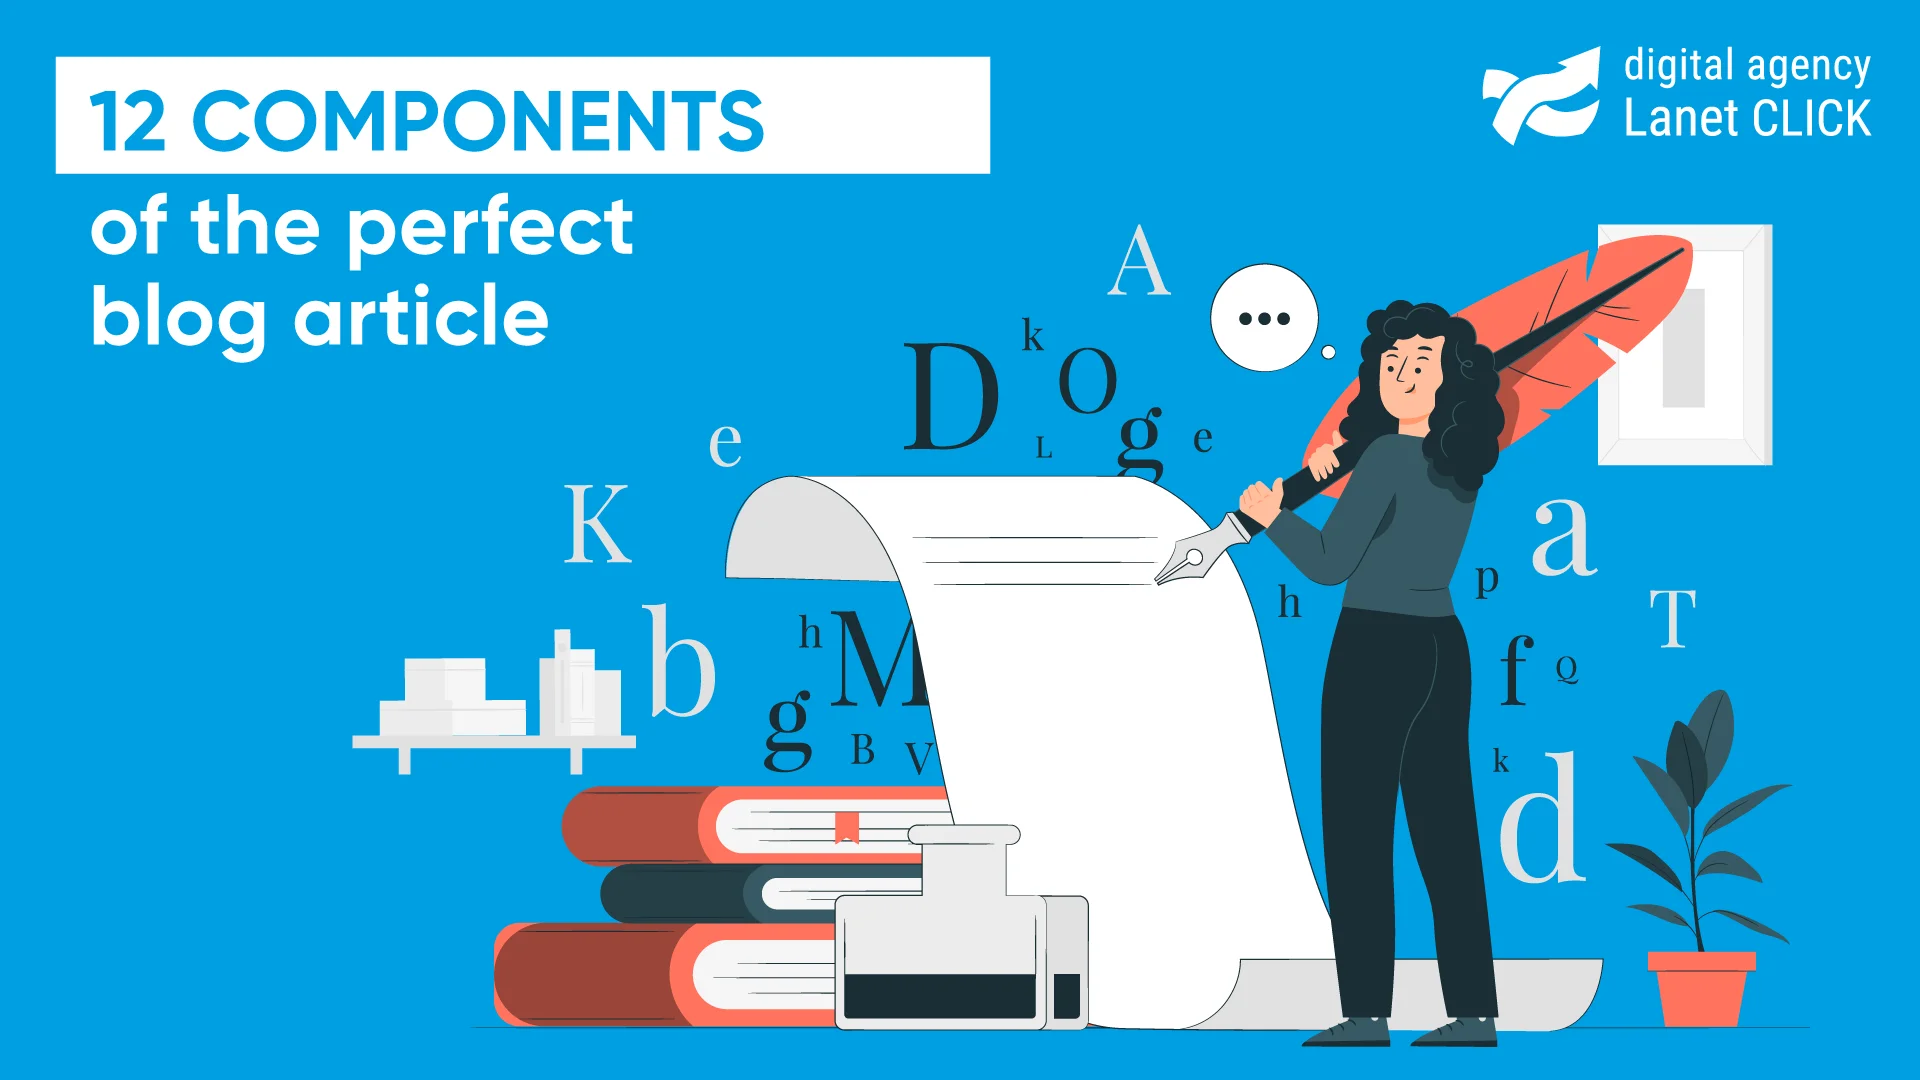 12 components of the perfect blog article